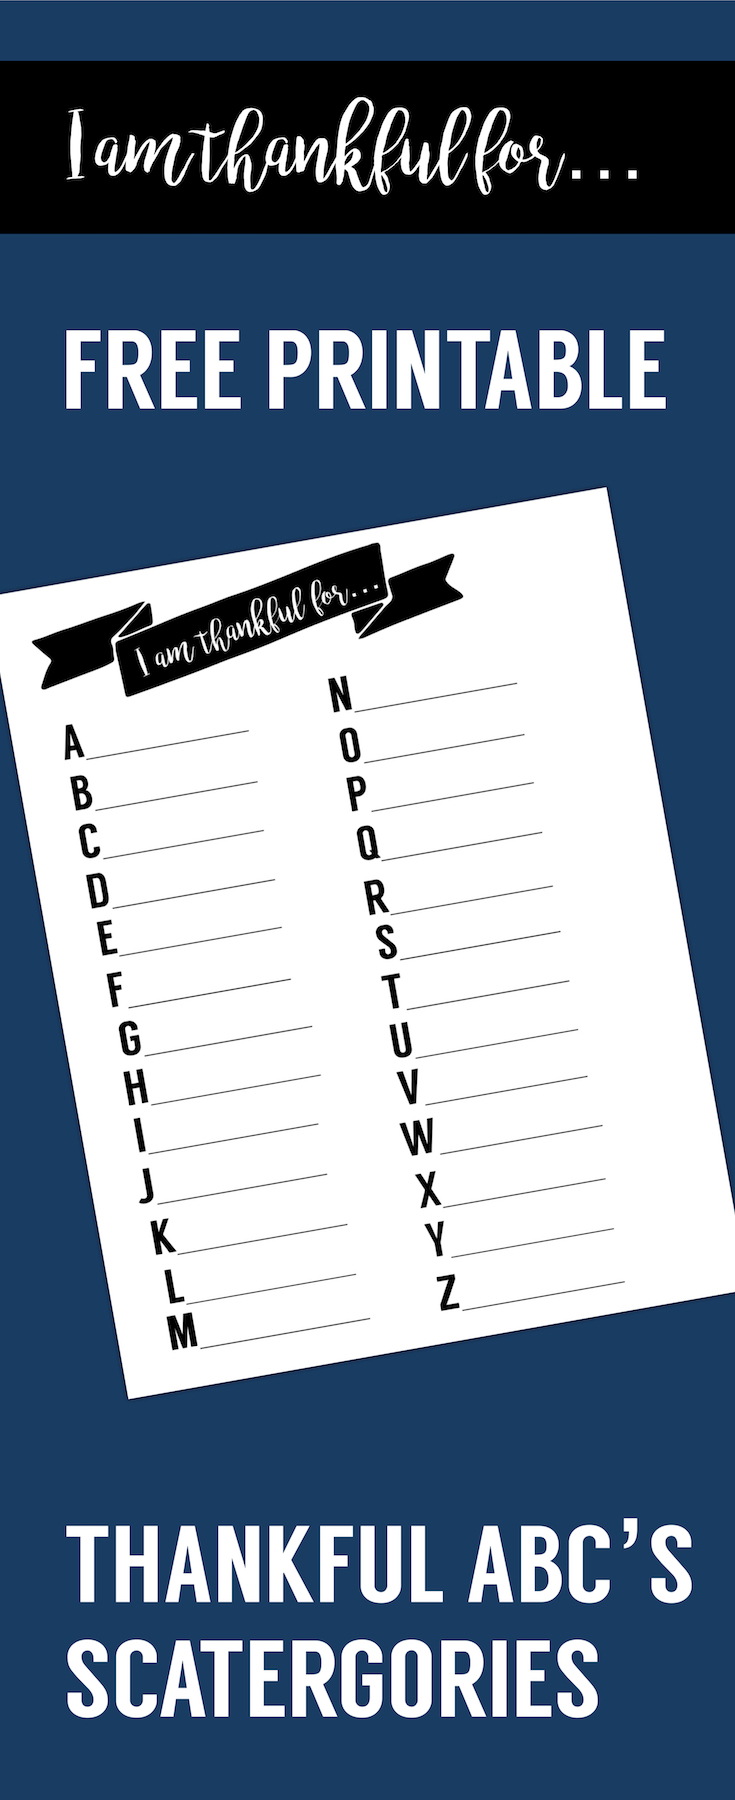 I Am Thankful Worksheet free printable. This ABC thankful list is great for Thanksgiving. Print this I am thankful for worksheet and play scatergories with your kids. 